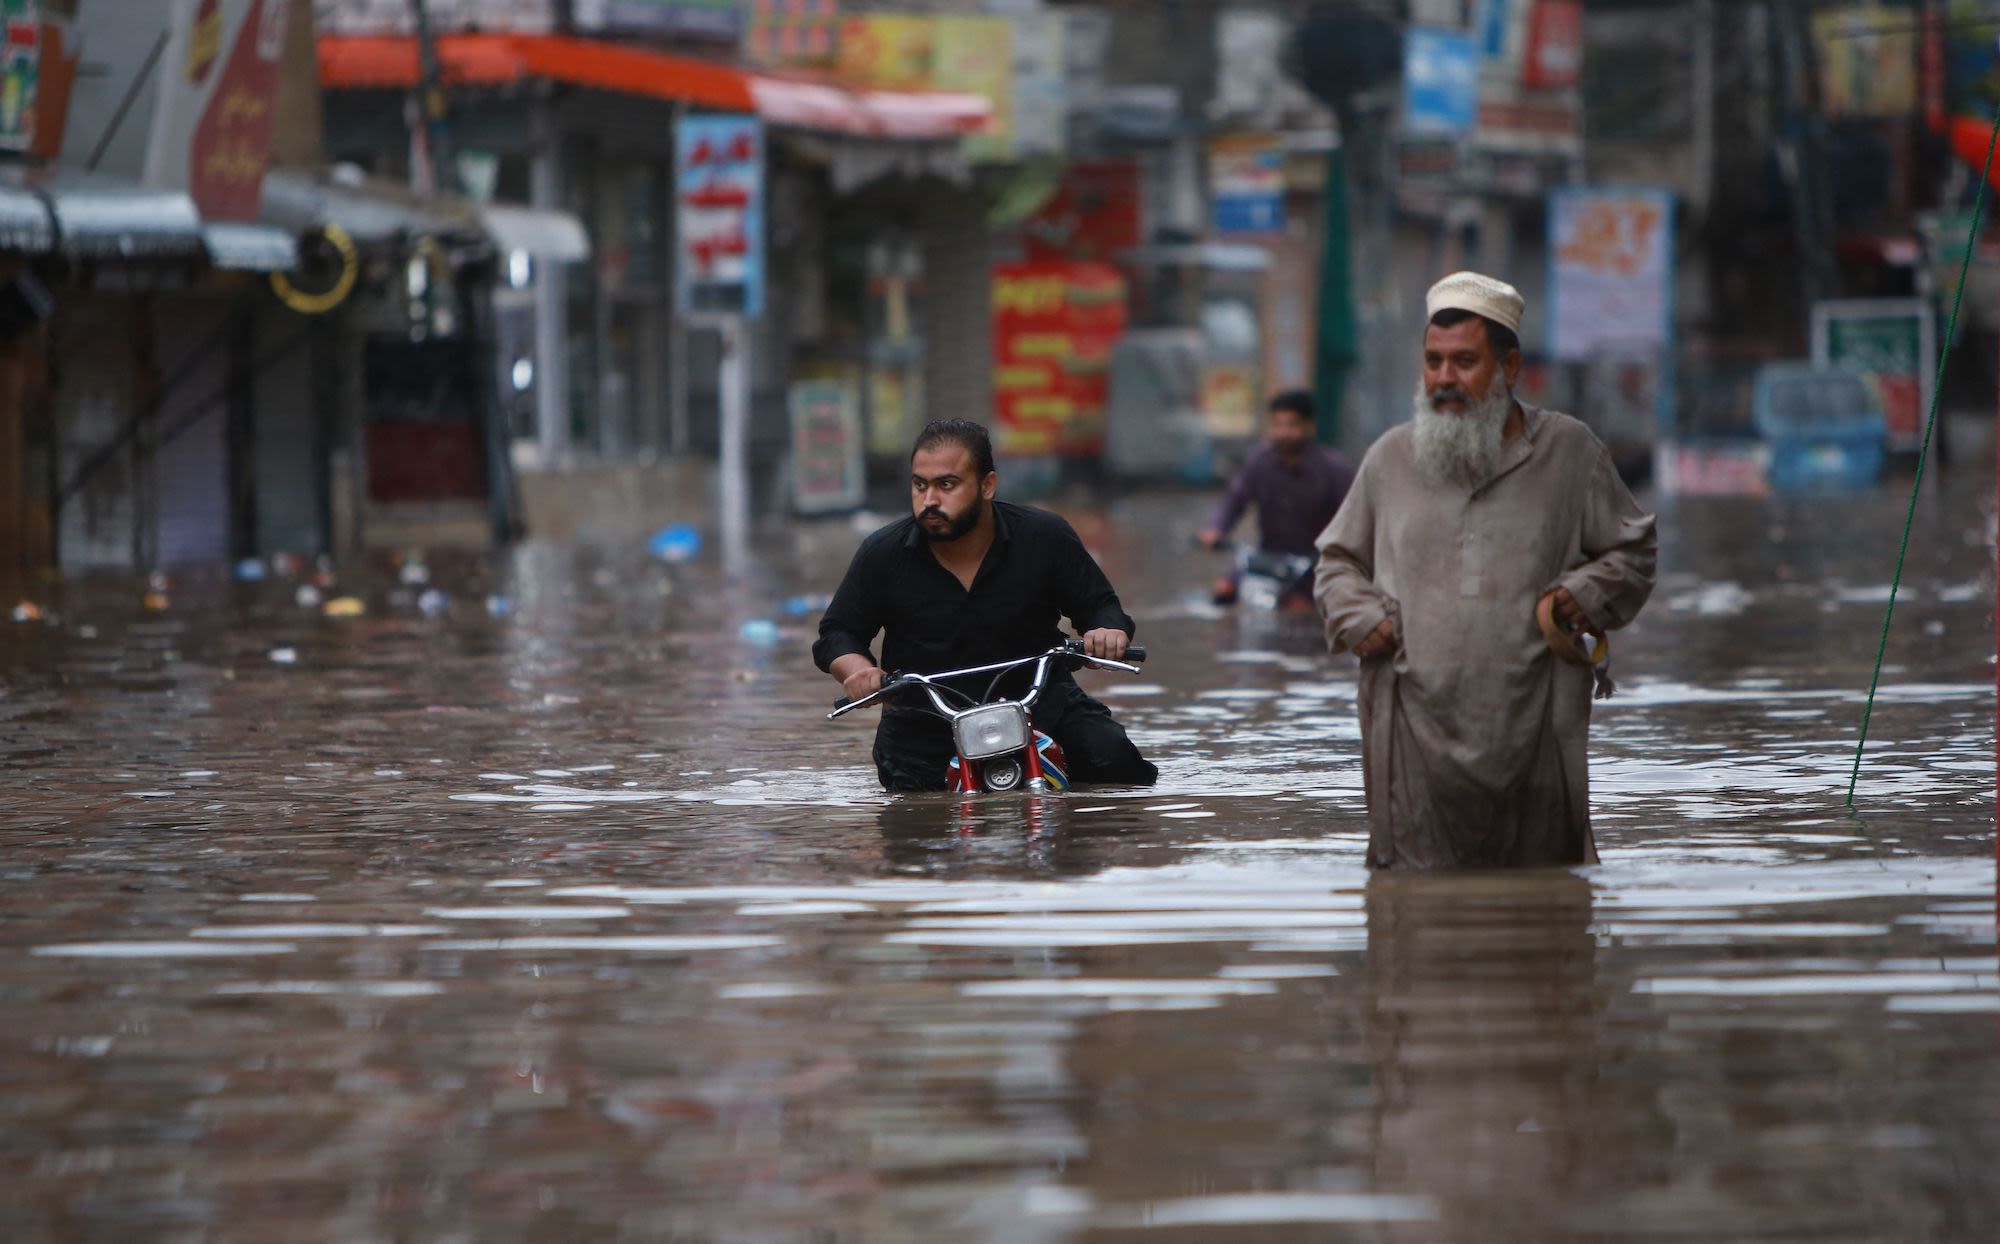 Over a year after Pakistan floods, survivors battle climate anxiety, Floods News